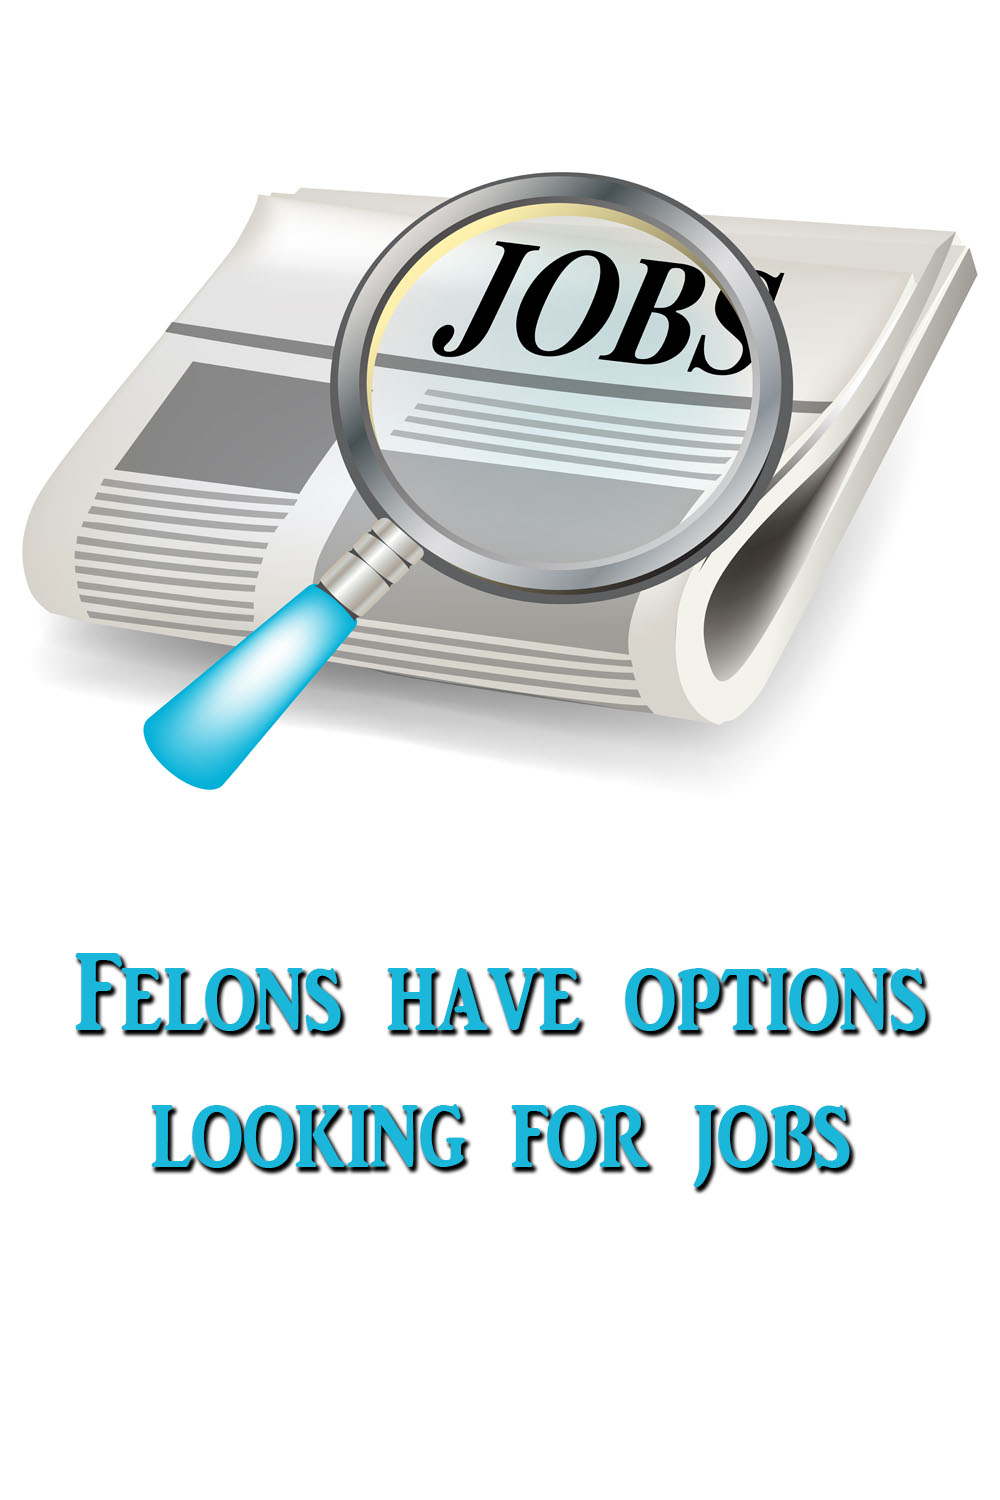 Felons have options looking for jobs